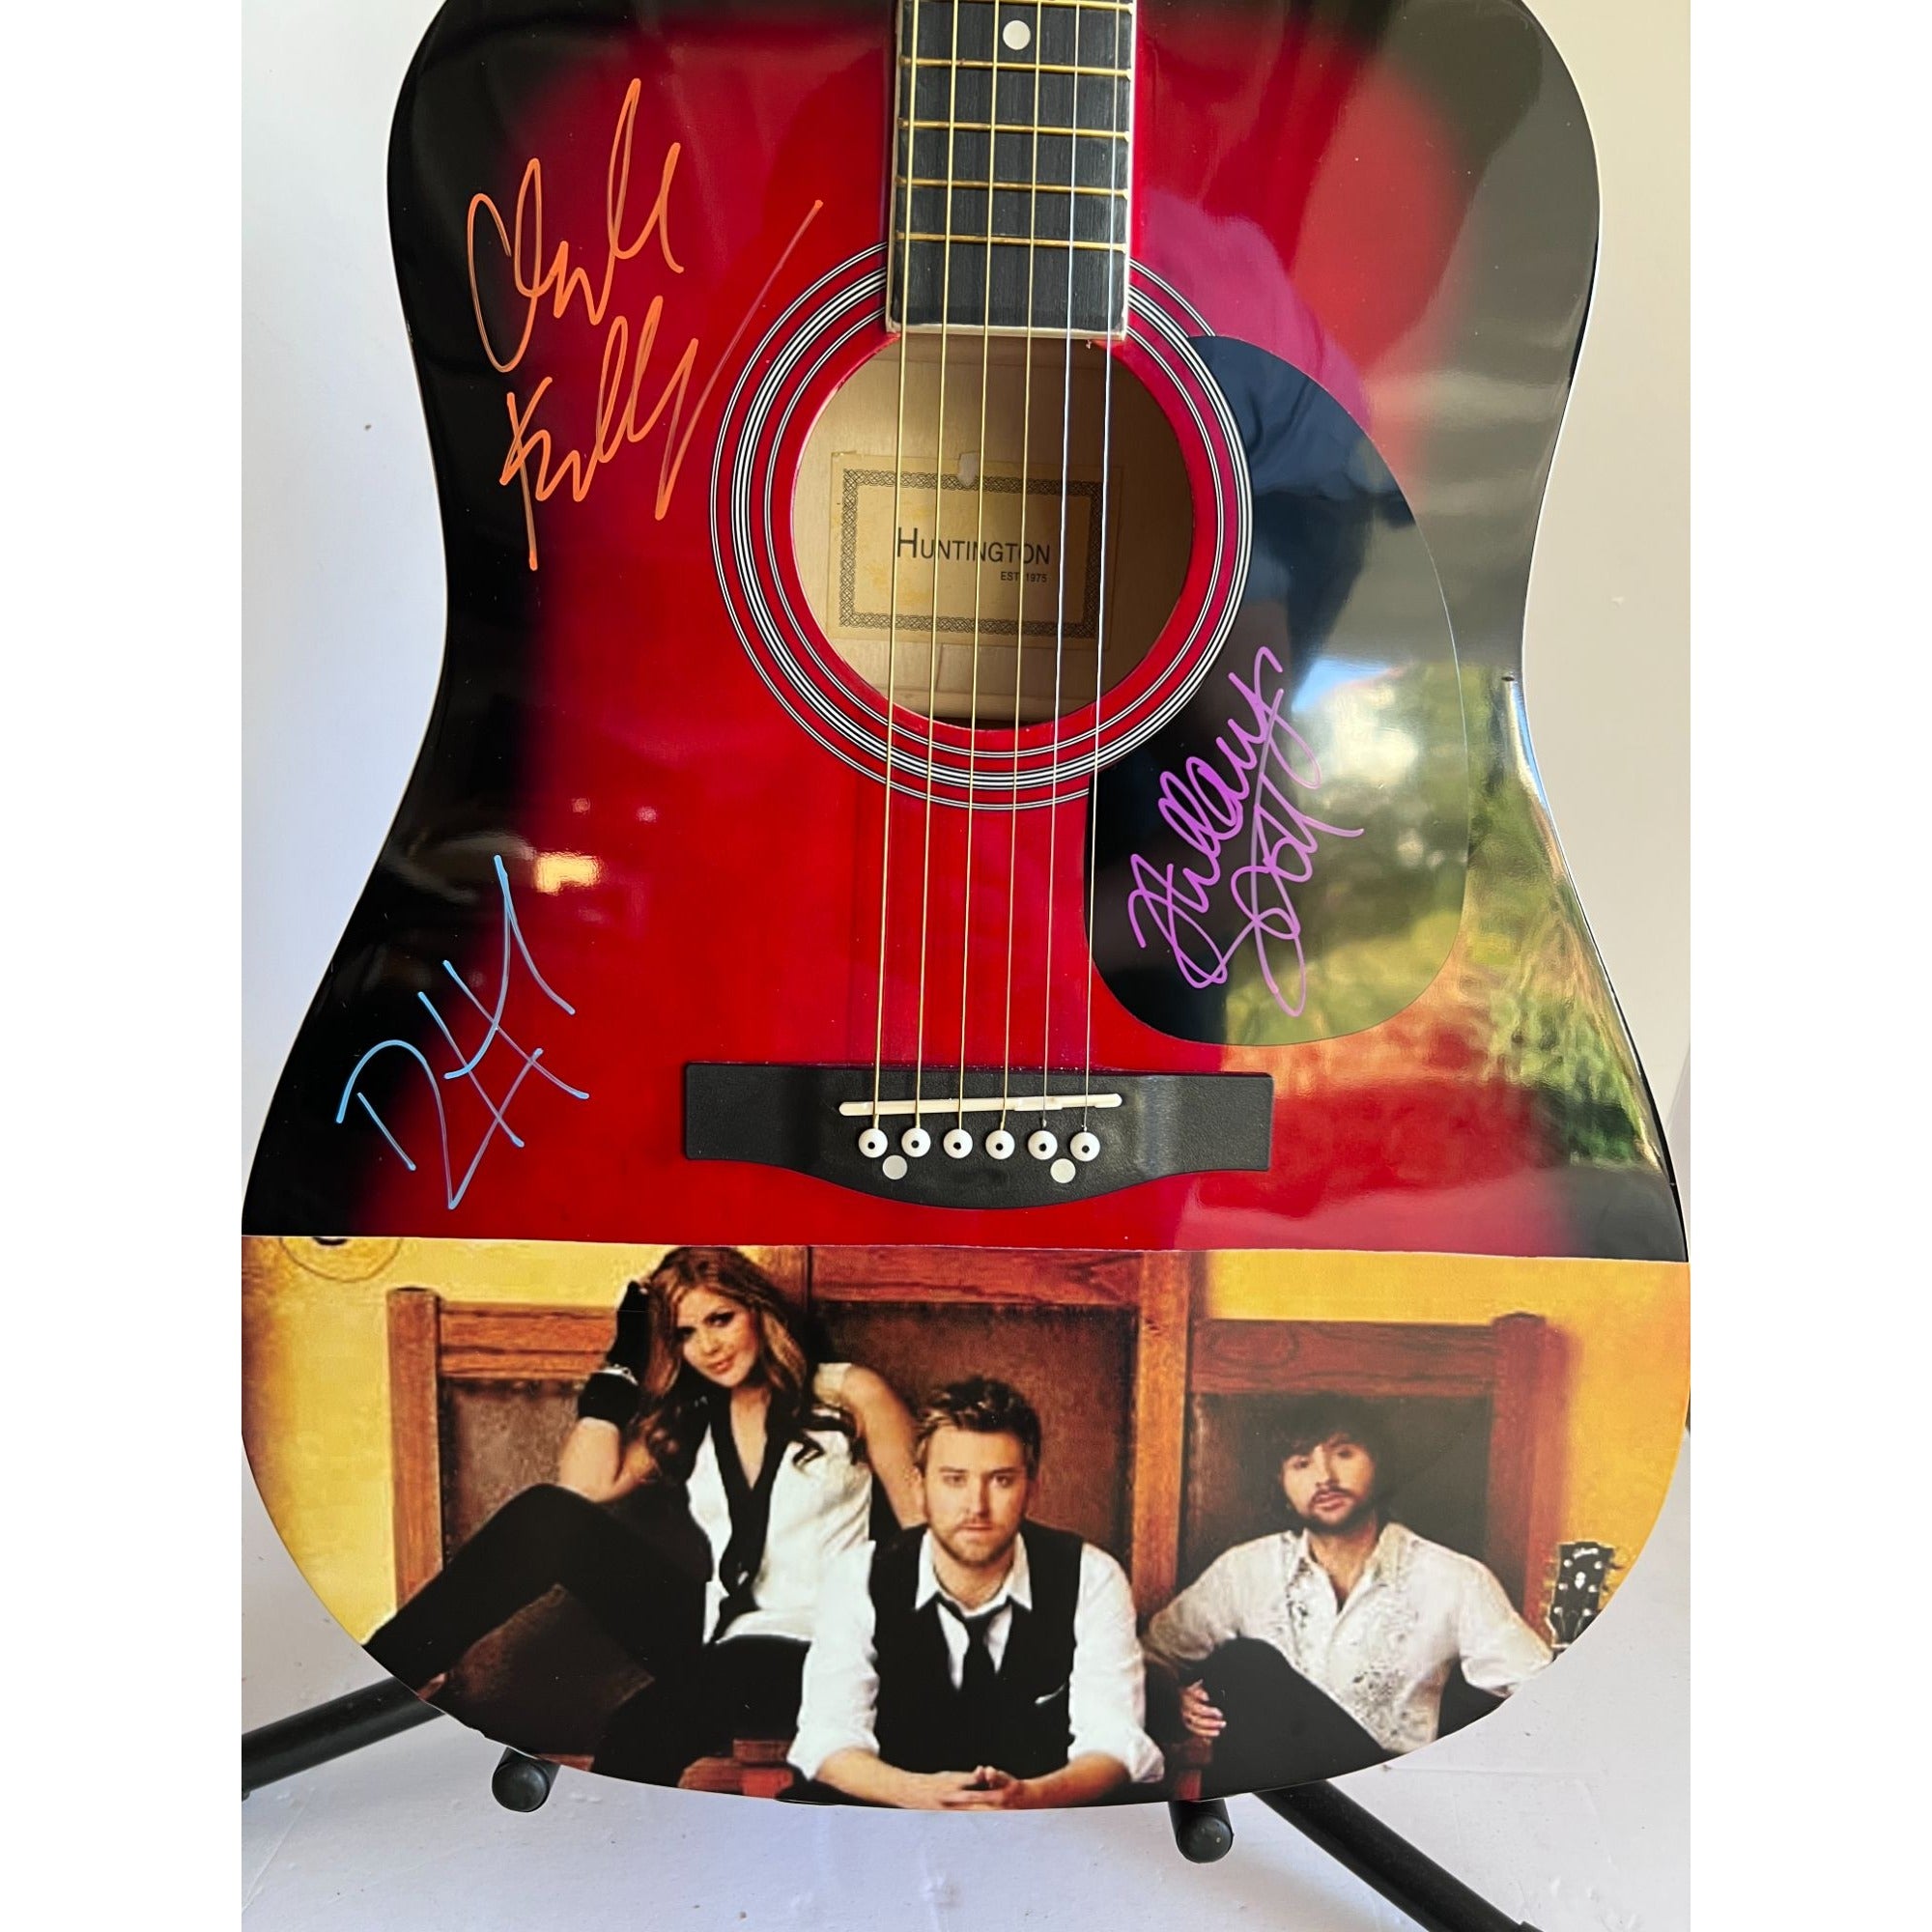 Lady Antebellum One of A kind 39' inch full size acoustic guitar signed